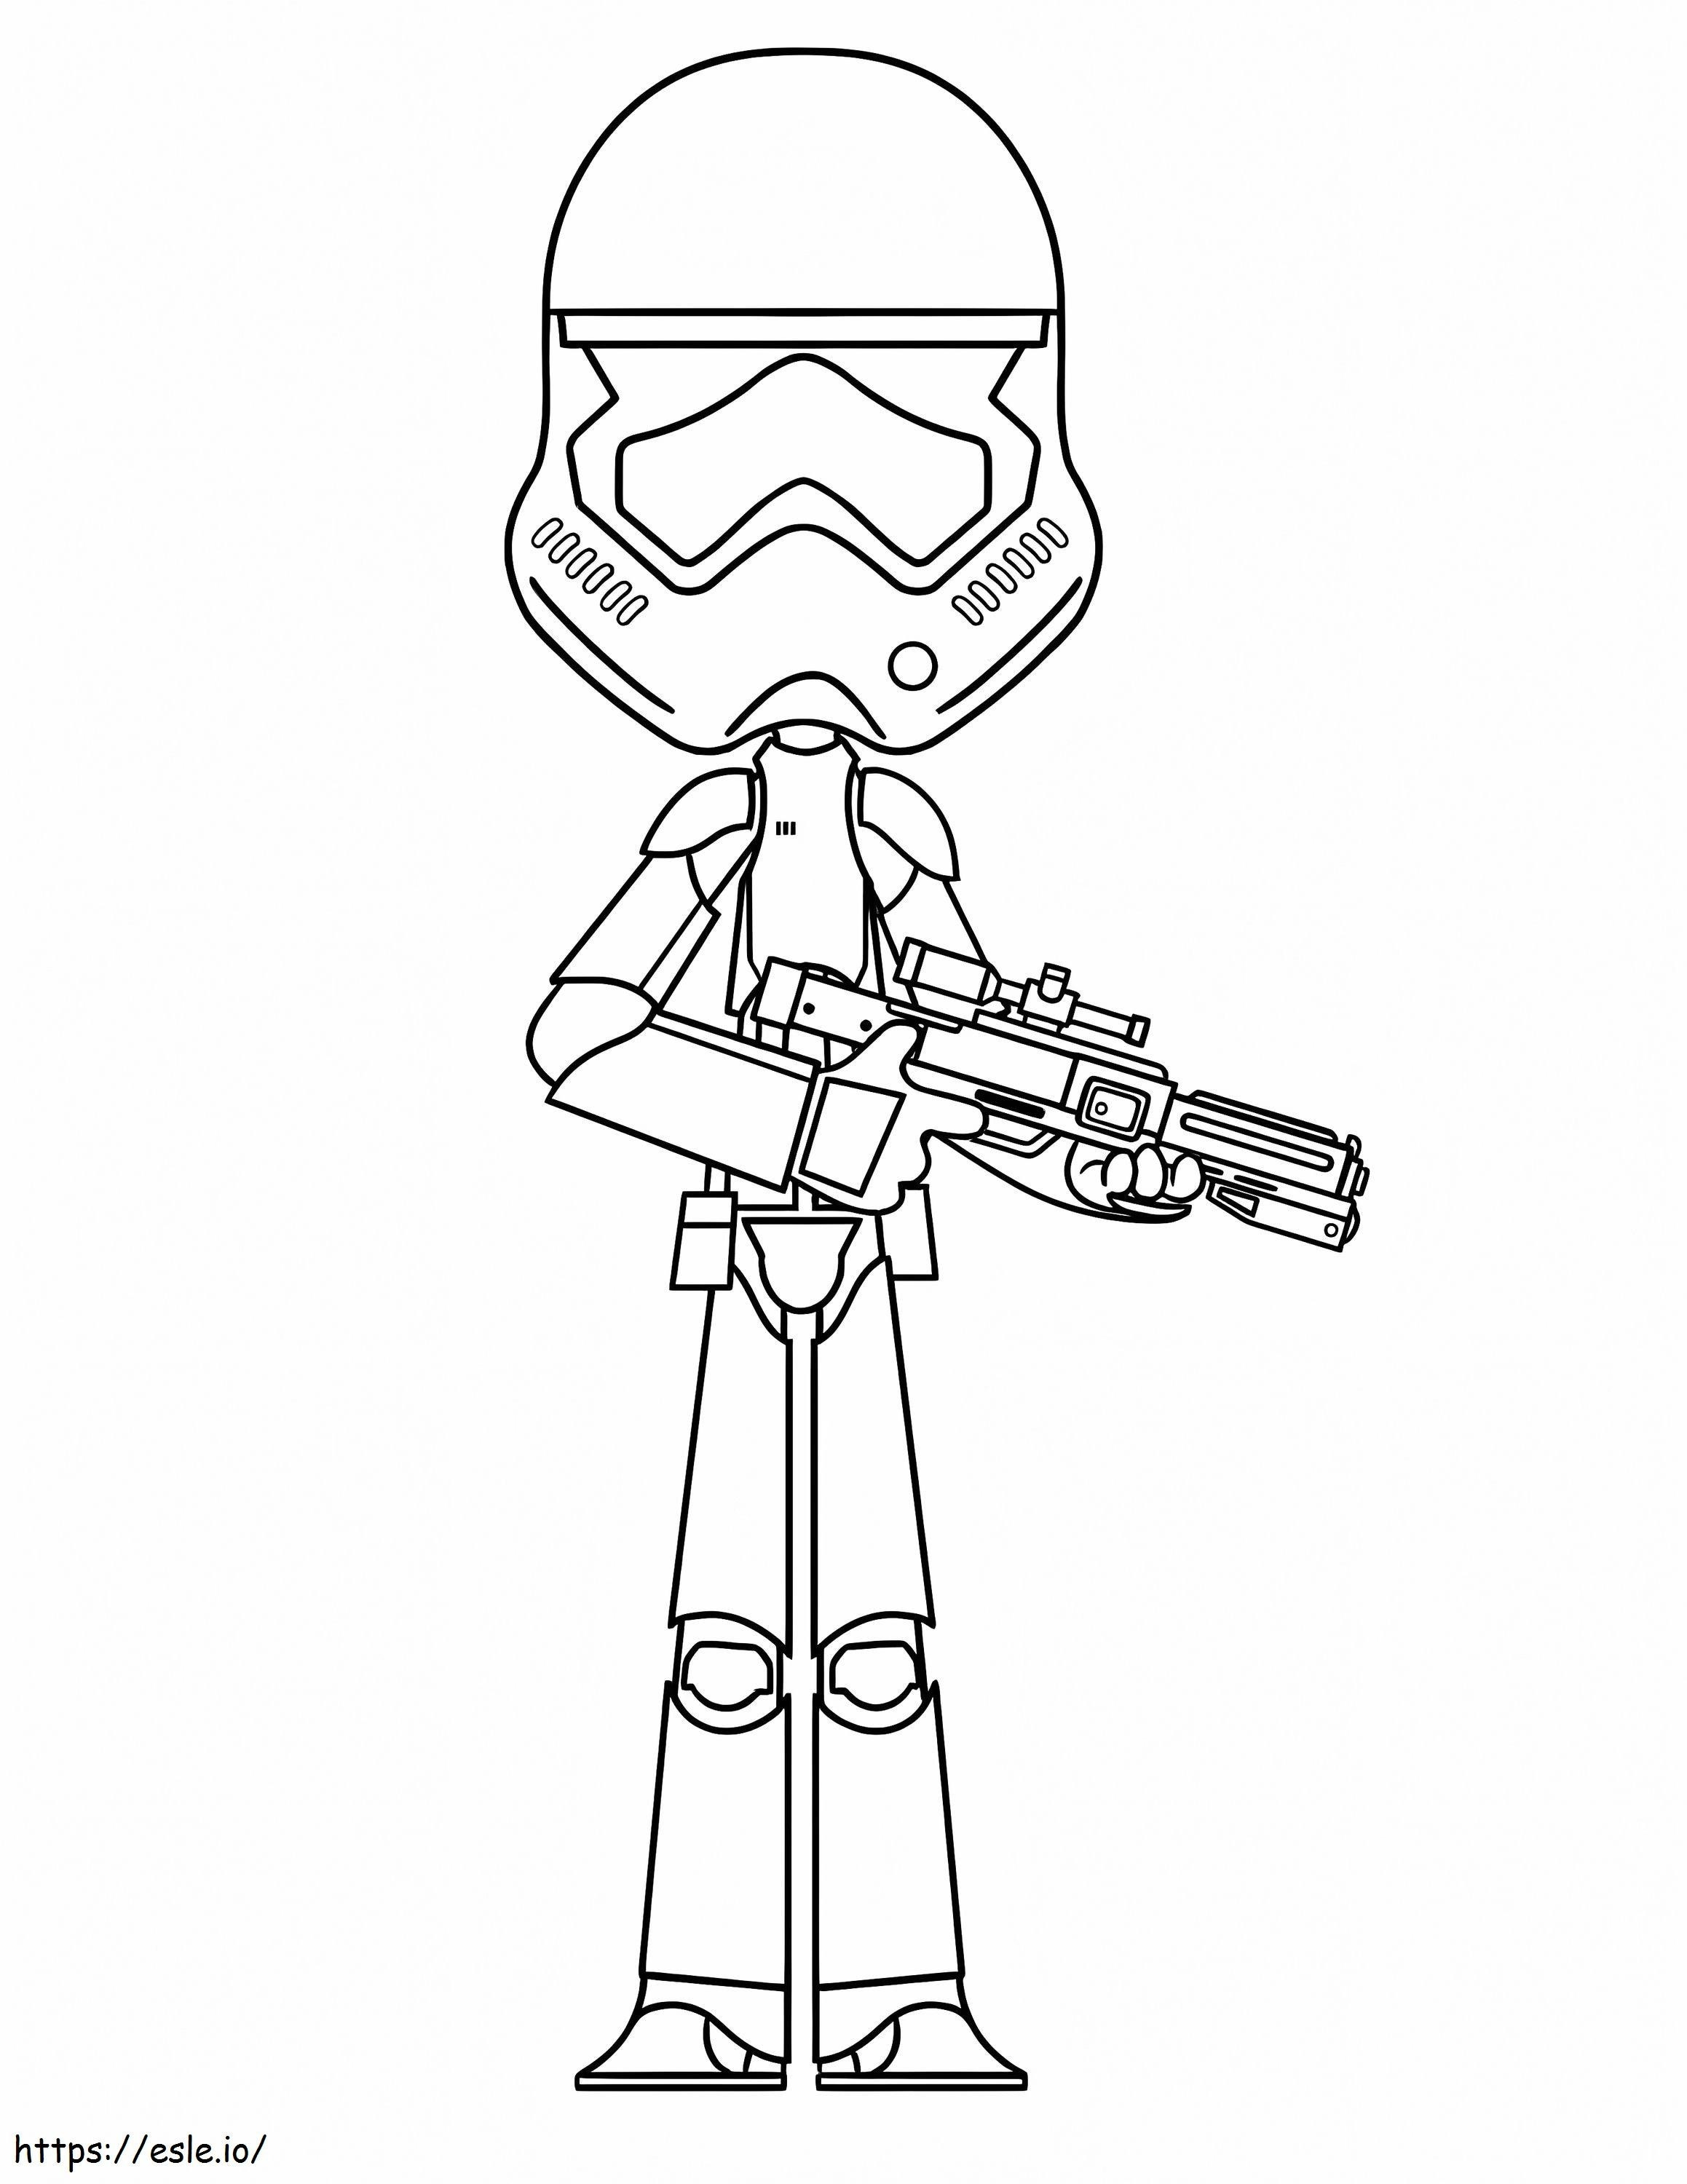 Funny Stormtrooper coloring page